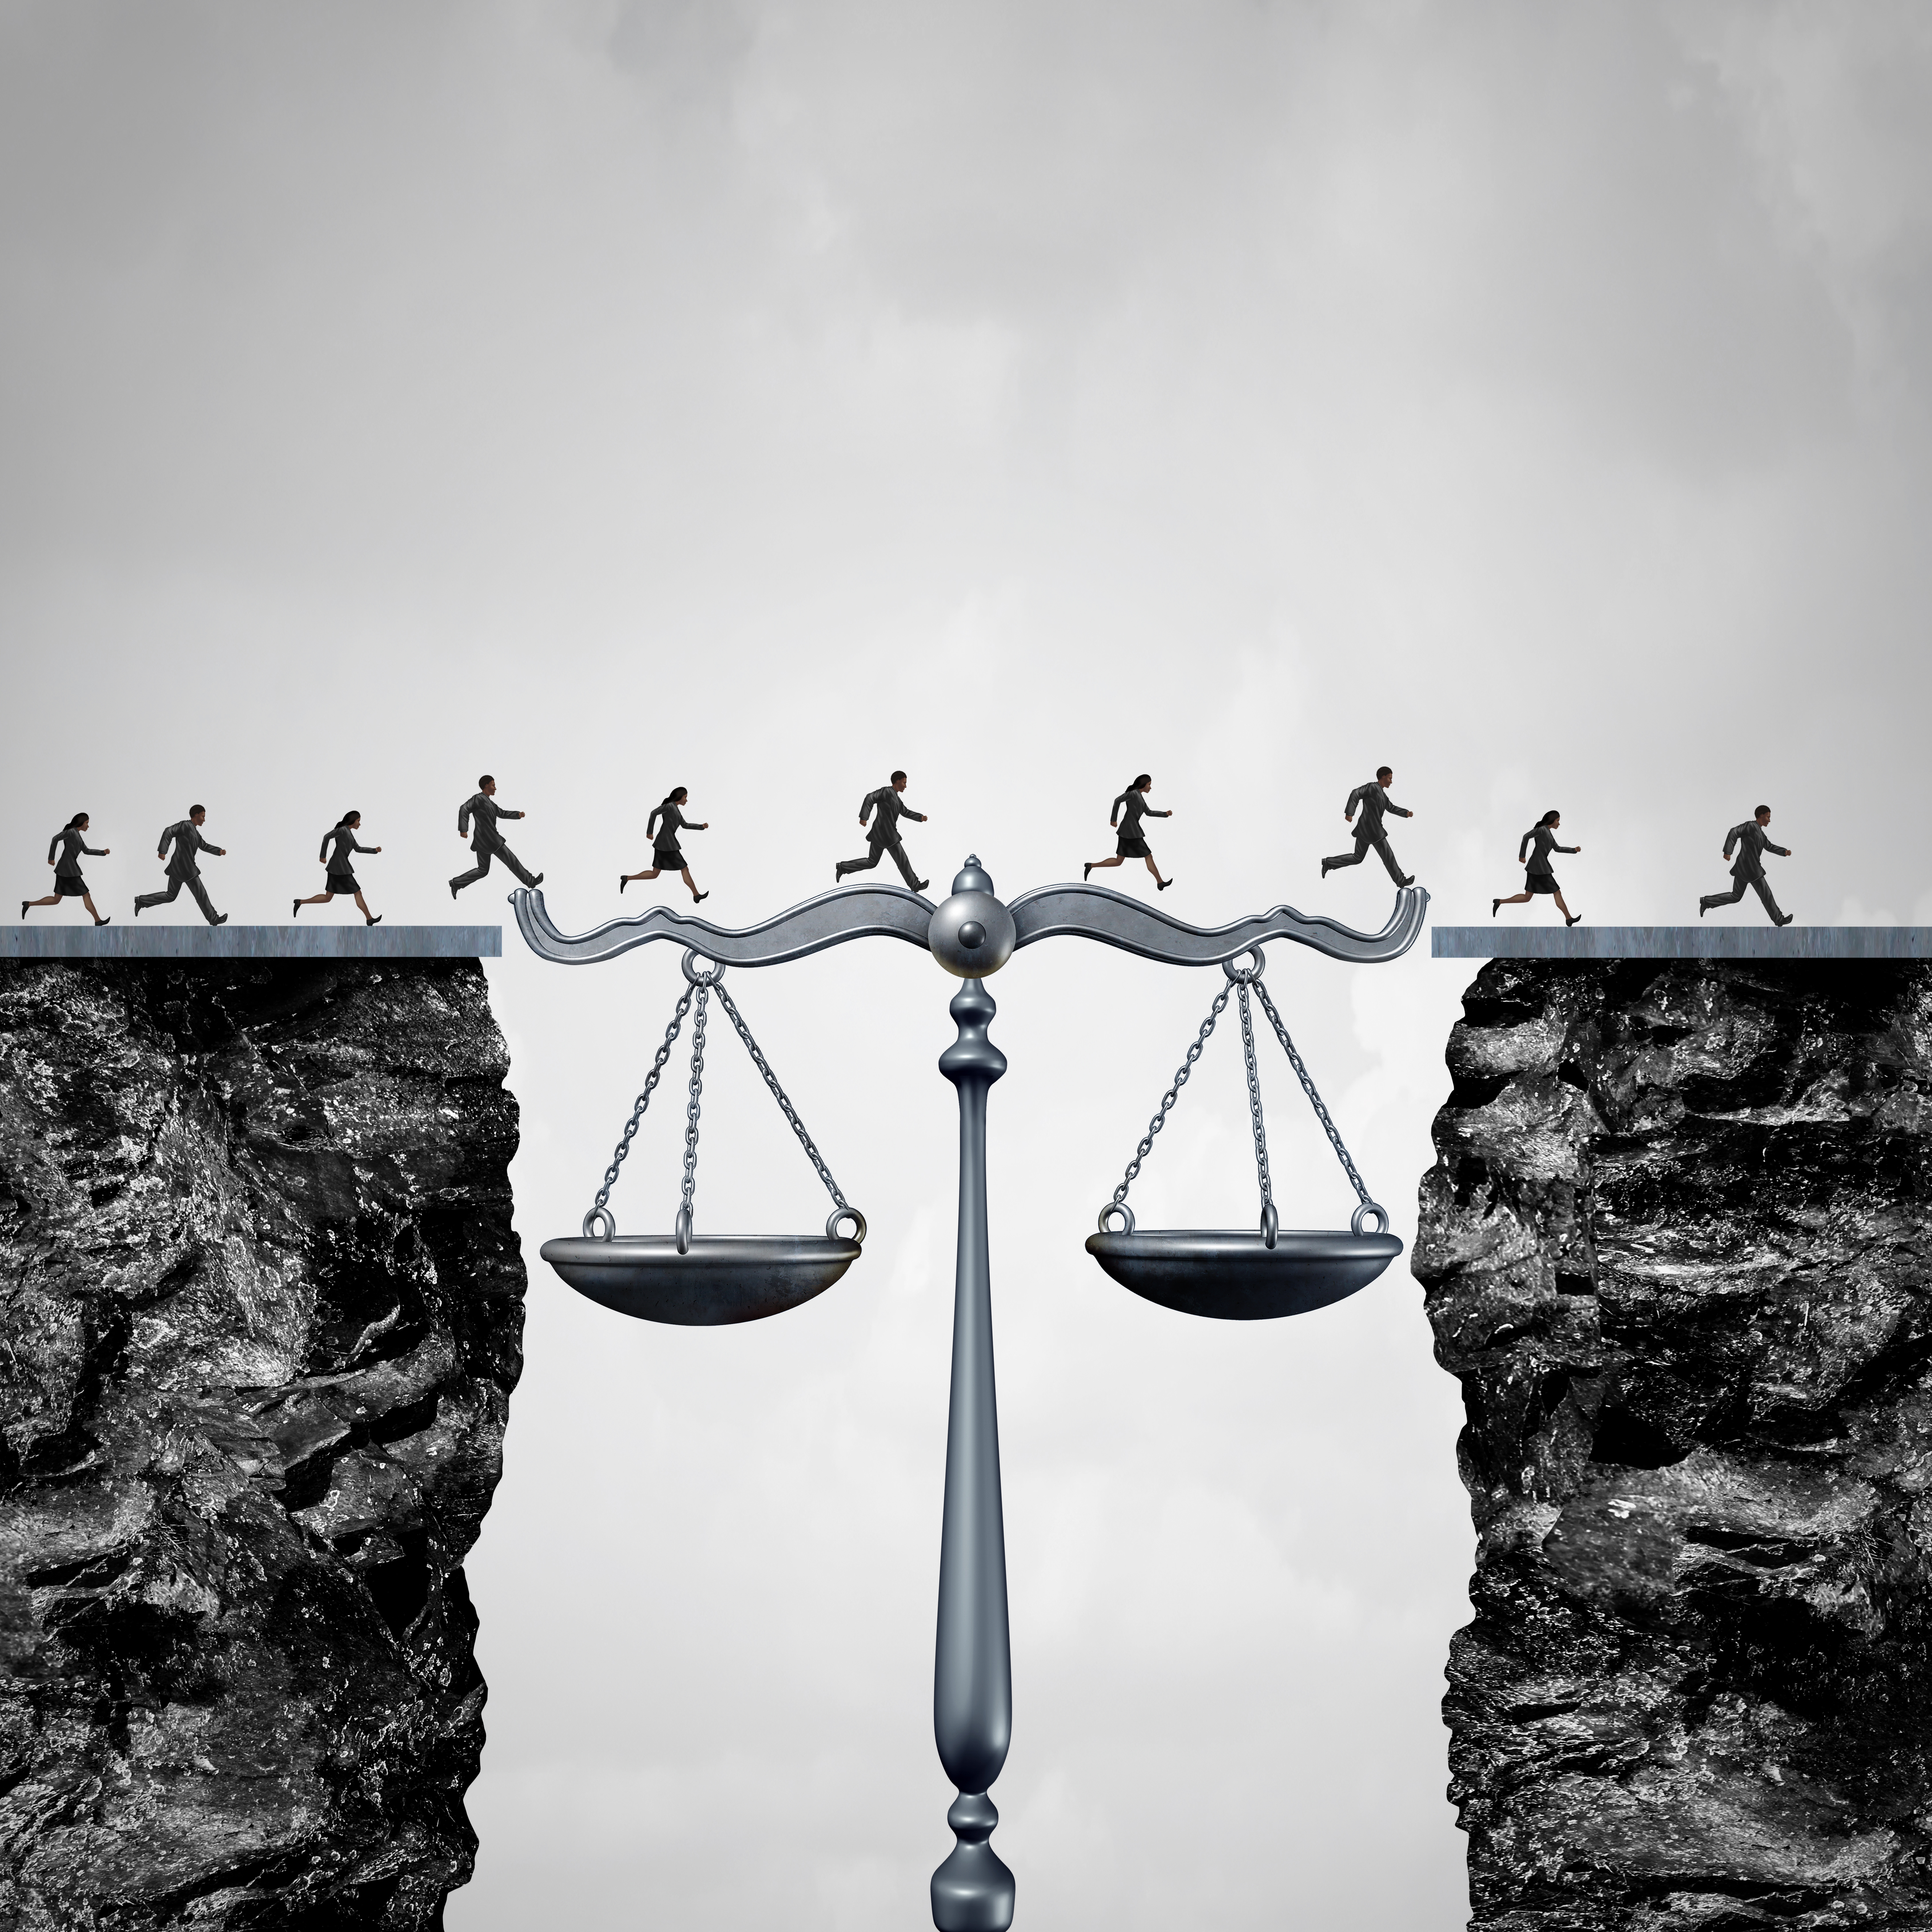 Law and attorney solution concept as a group of lawyers or corporate businessmen and businesswomen crossing two cliffs with the help of a justice scale acting as a bridge to legal services success with 3D illustration elements.